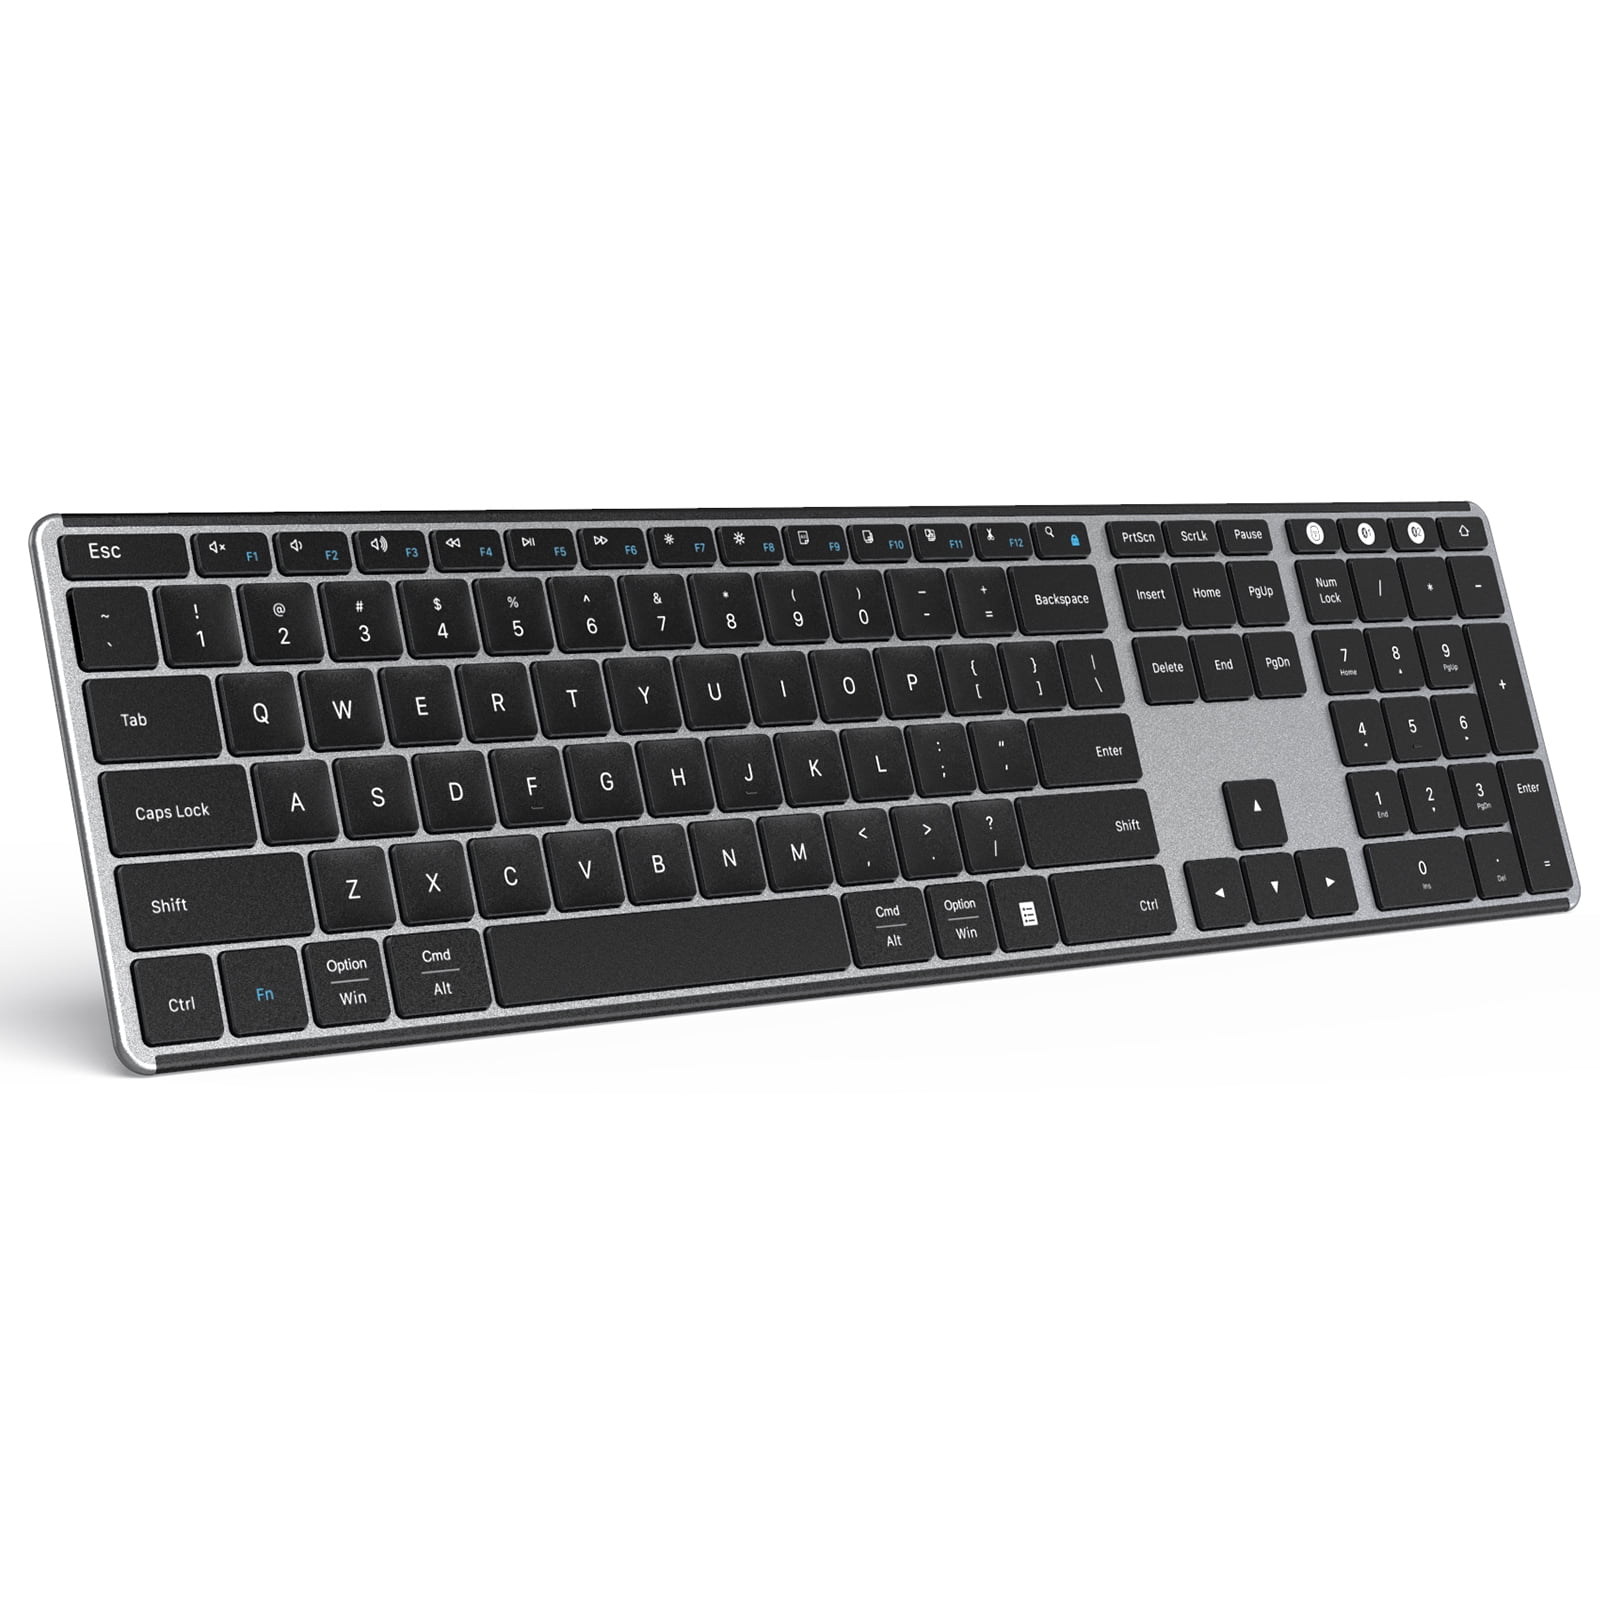 Seenda Ultra Slim Low Profile Wireless Keyboard and Mouse Combo with Number Pad for Windows Devices Black 